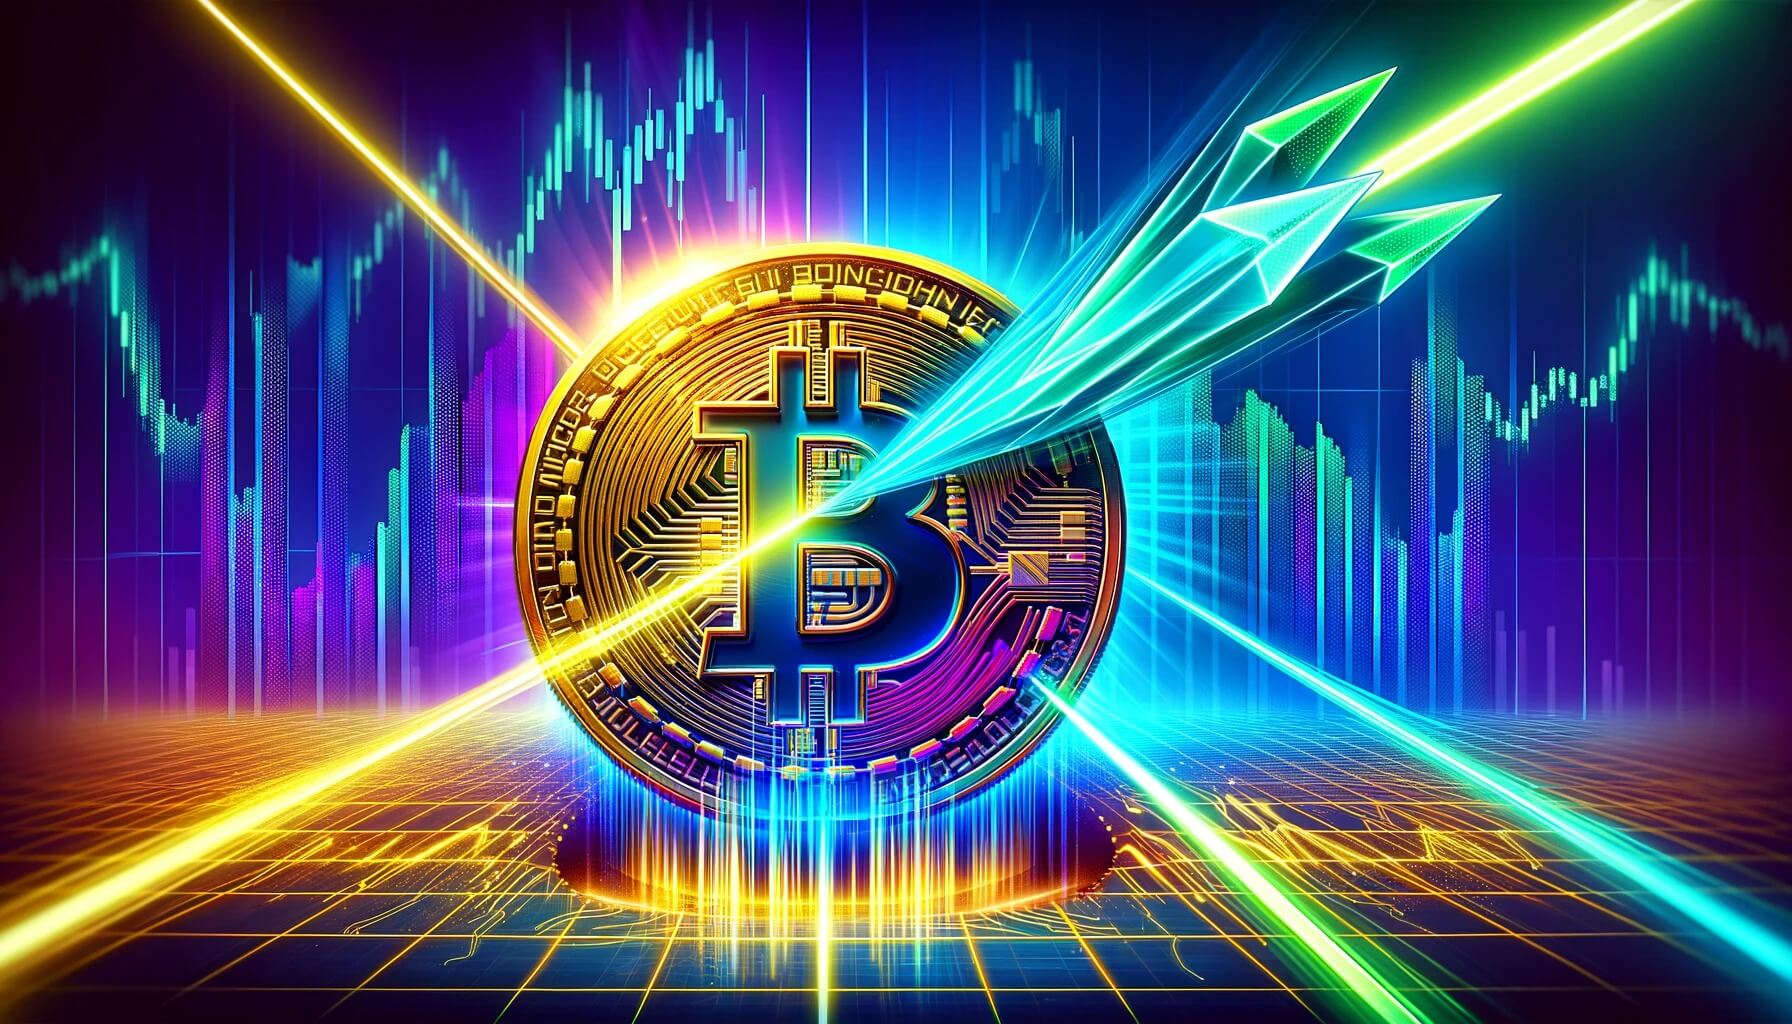 golden Bitcoin emblem being precisely split in two by vivid laser beams in shades of electric blue and neon